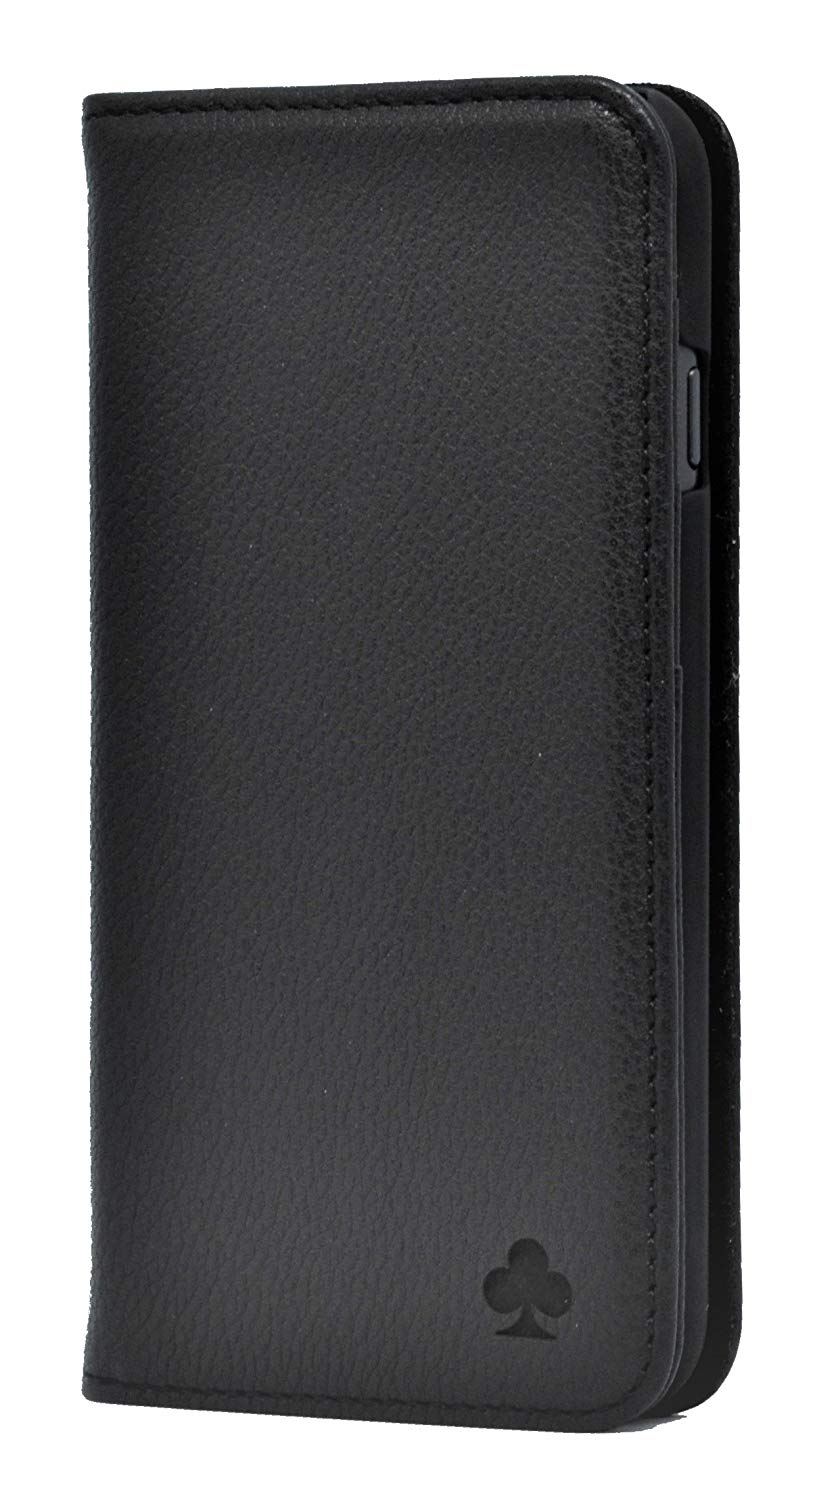 iPhone 11 Leather Case. Premium Slim Genuine Leather Stand Case/Cover/Wallet (Pure Black)